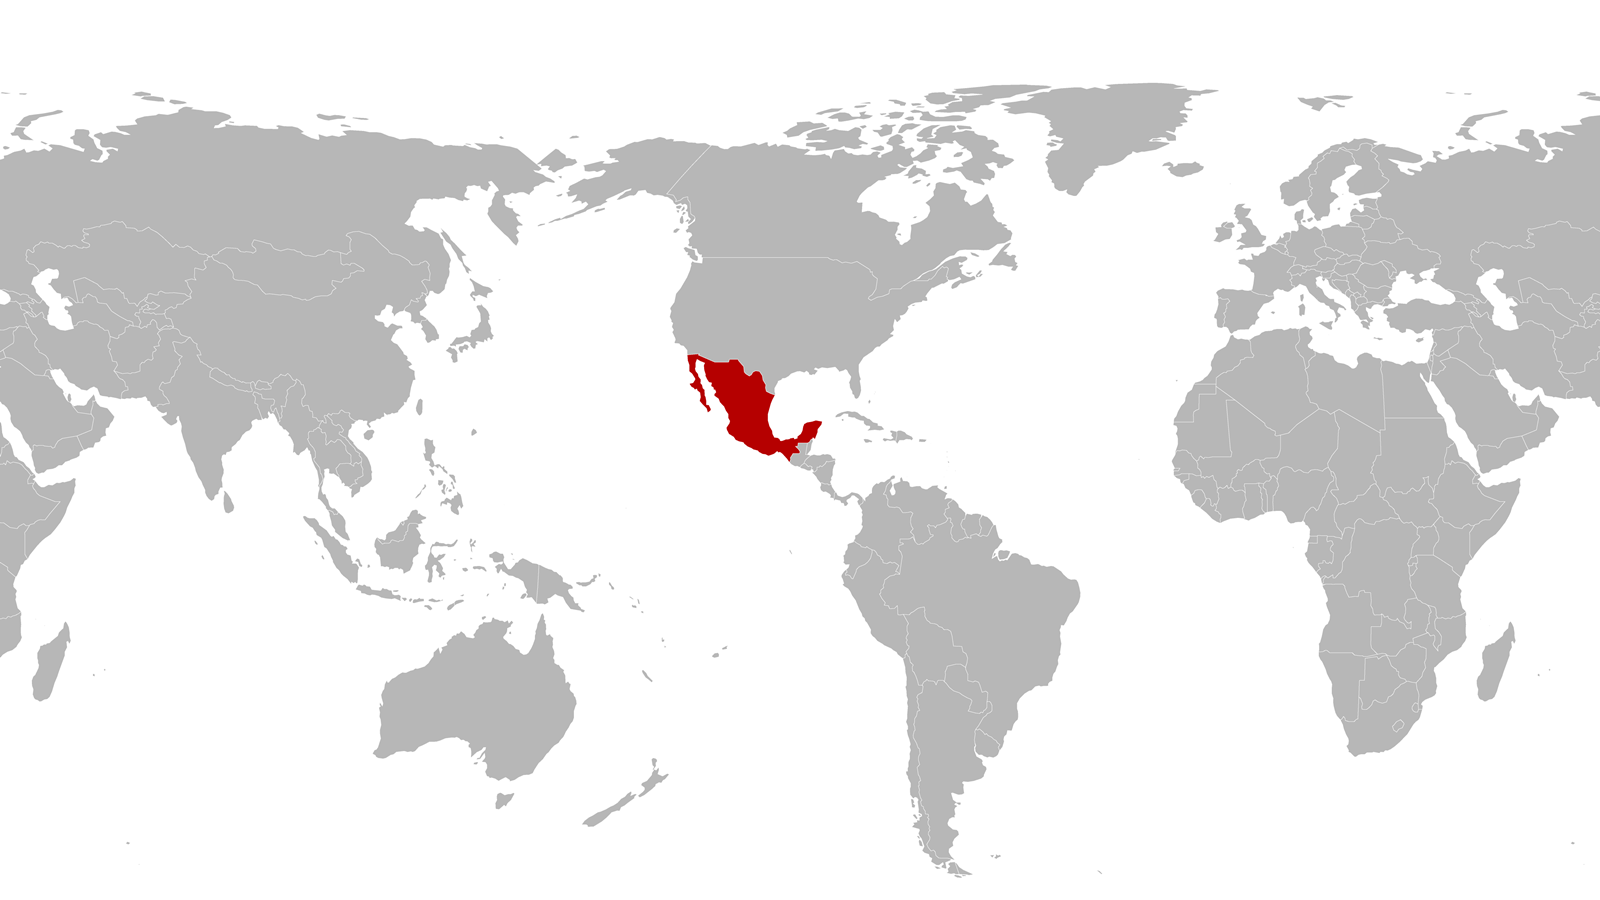 World map with centred Mexico highlighted